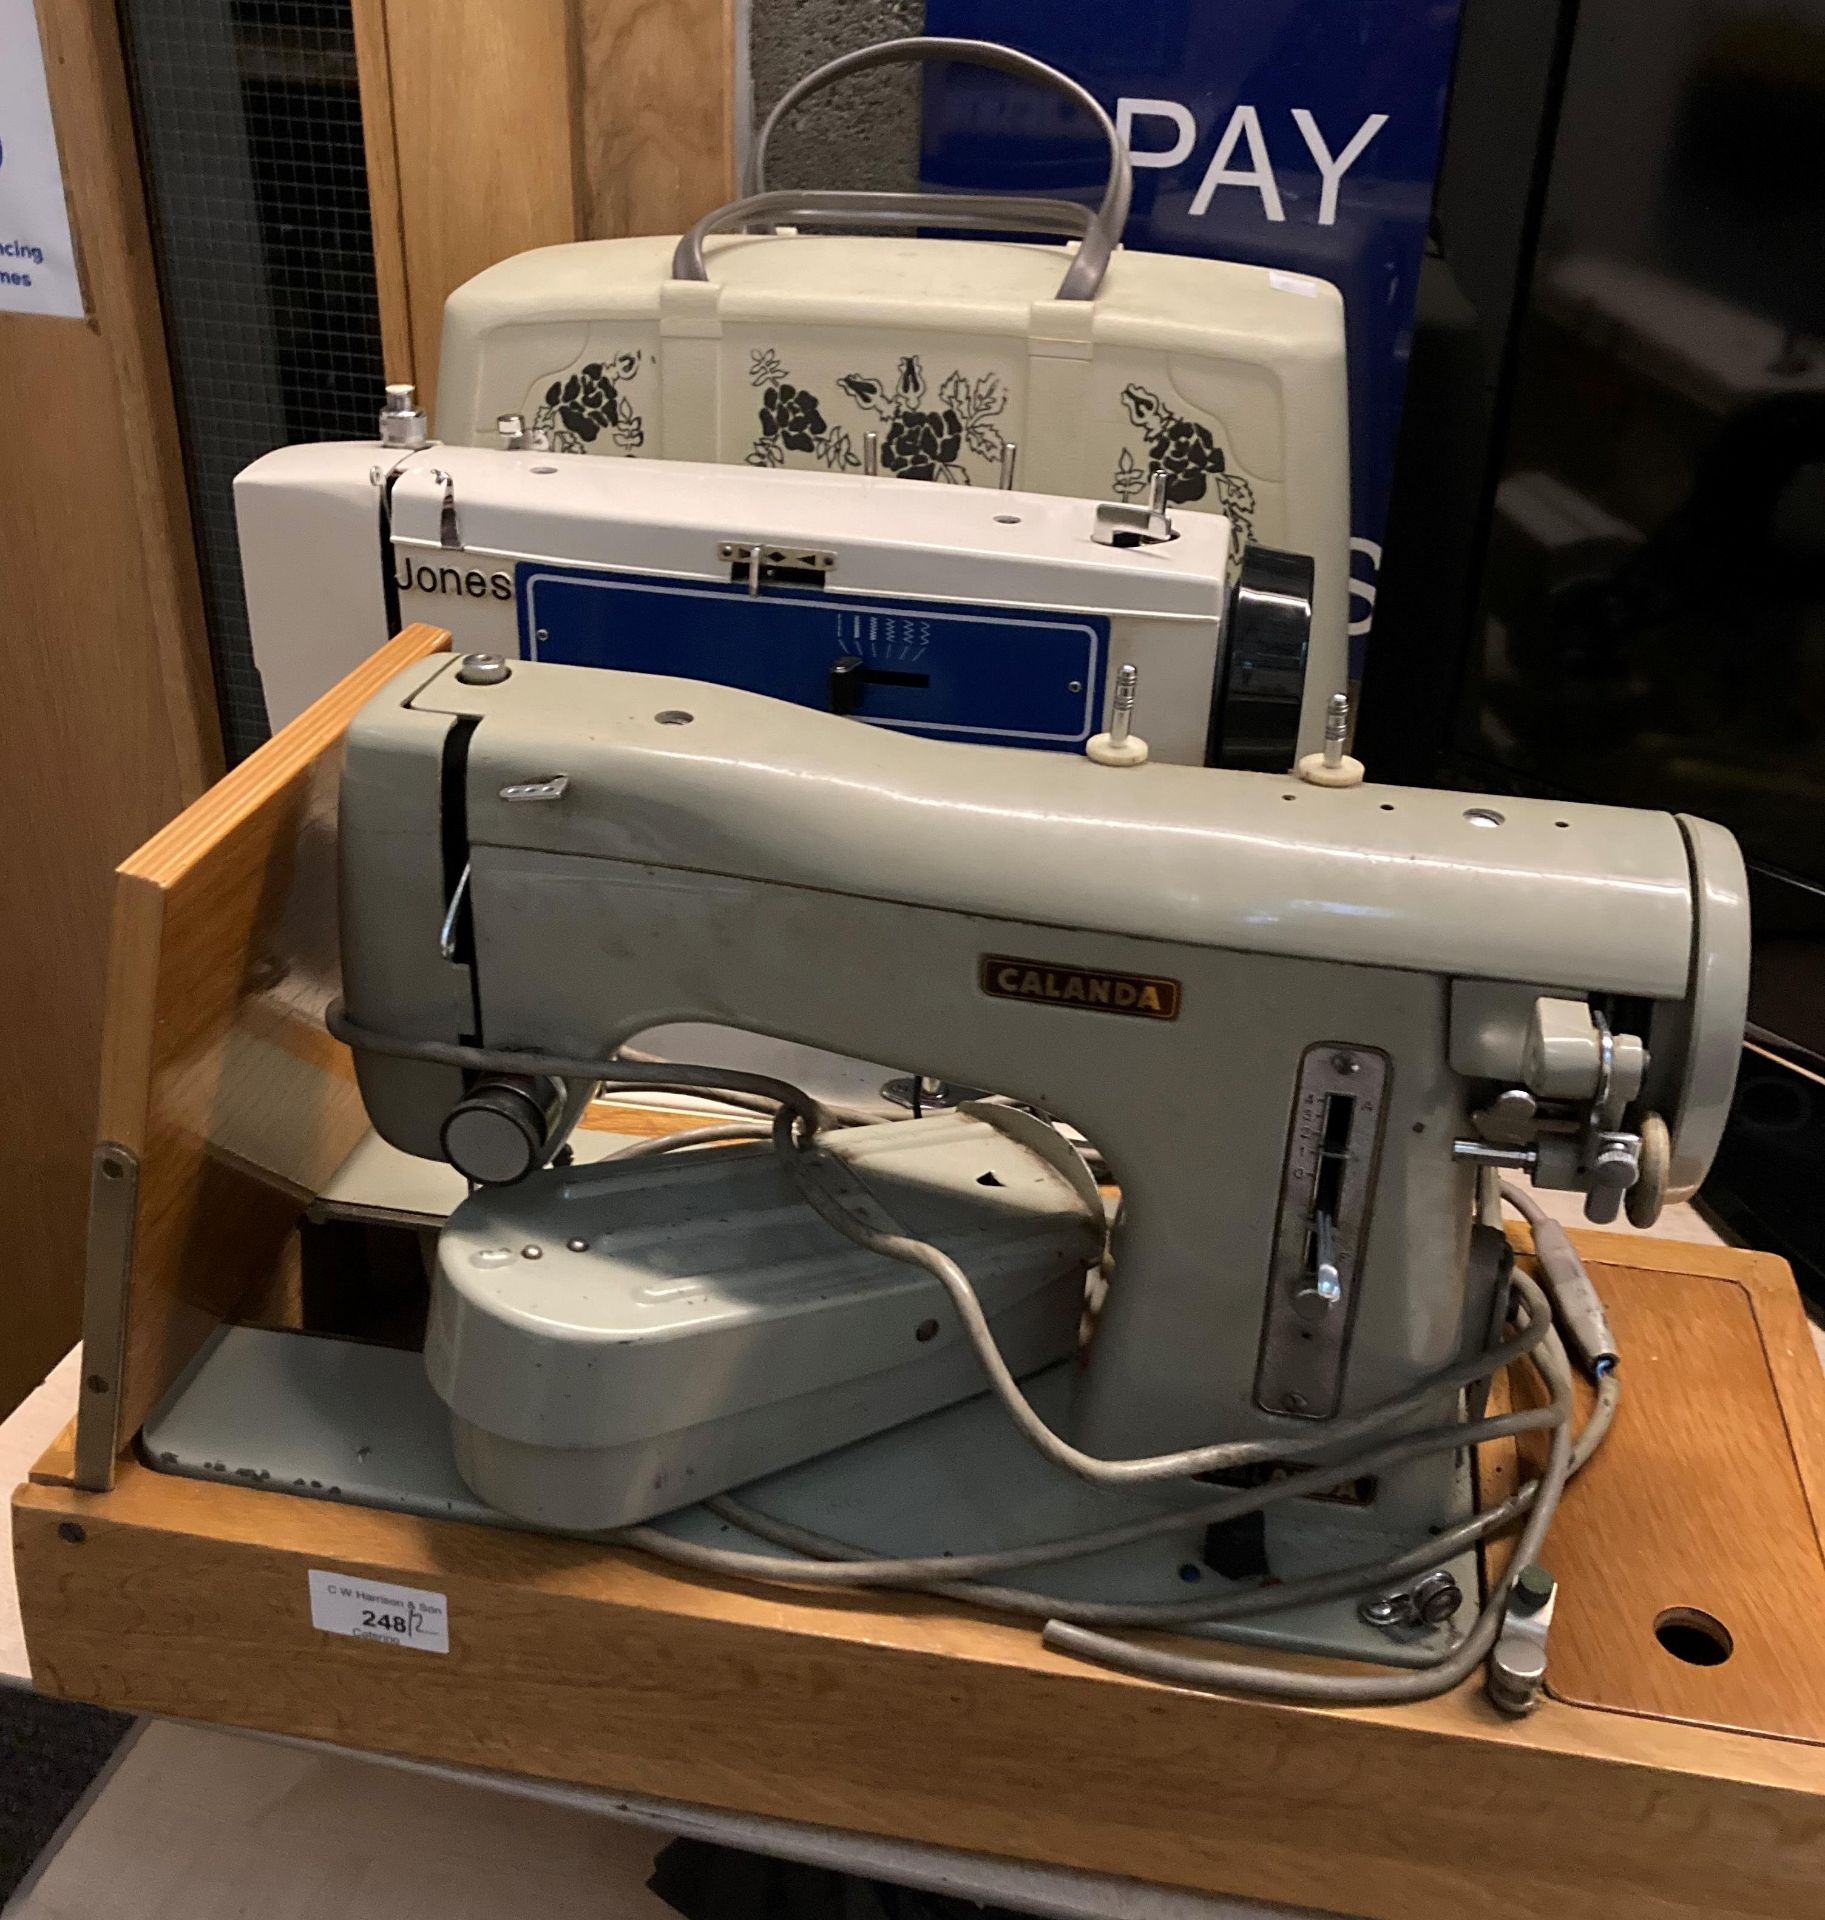 A Jones 240v portable sewing machine complete with case - no lead (not PAT tested) and a Calenda